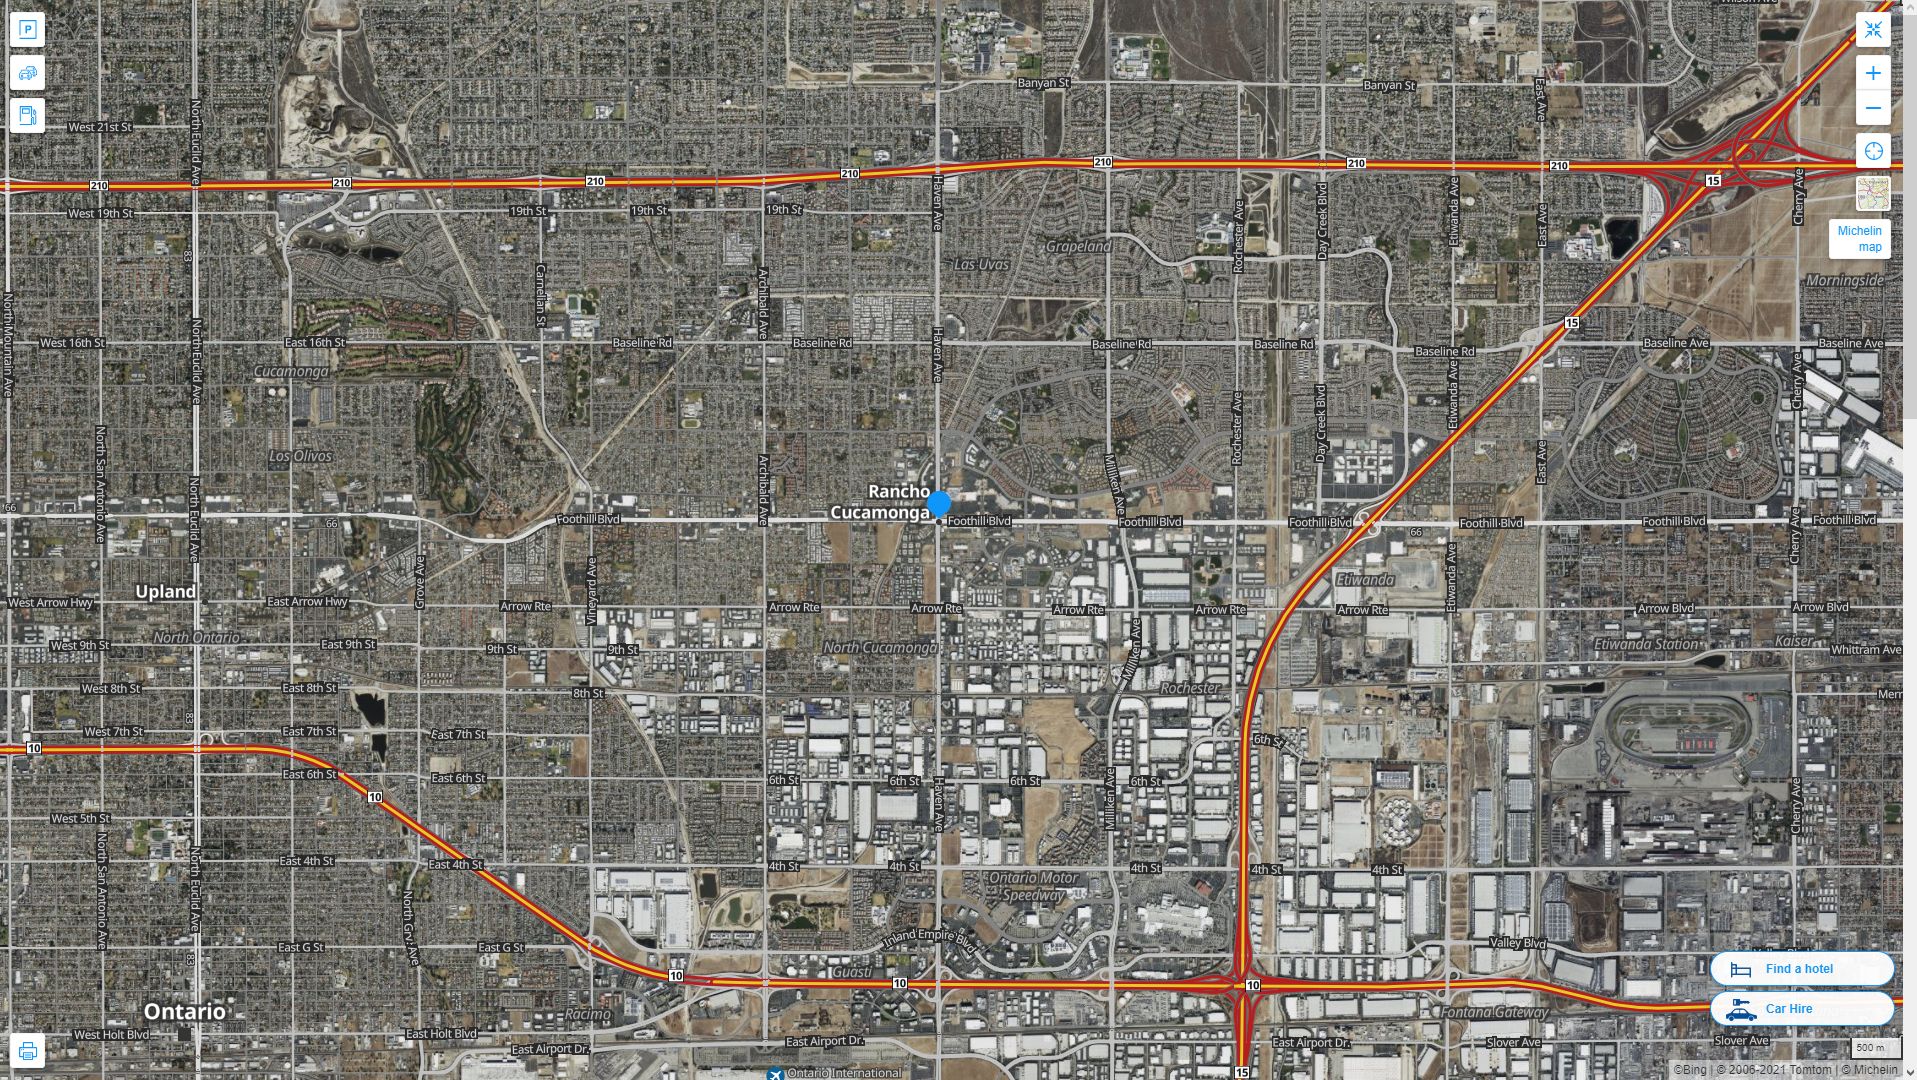 Rancho Cucamonga California Highway and Road Map with Satellite View